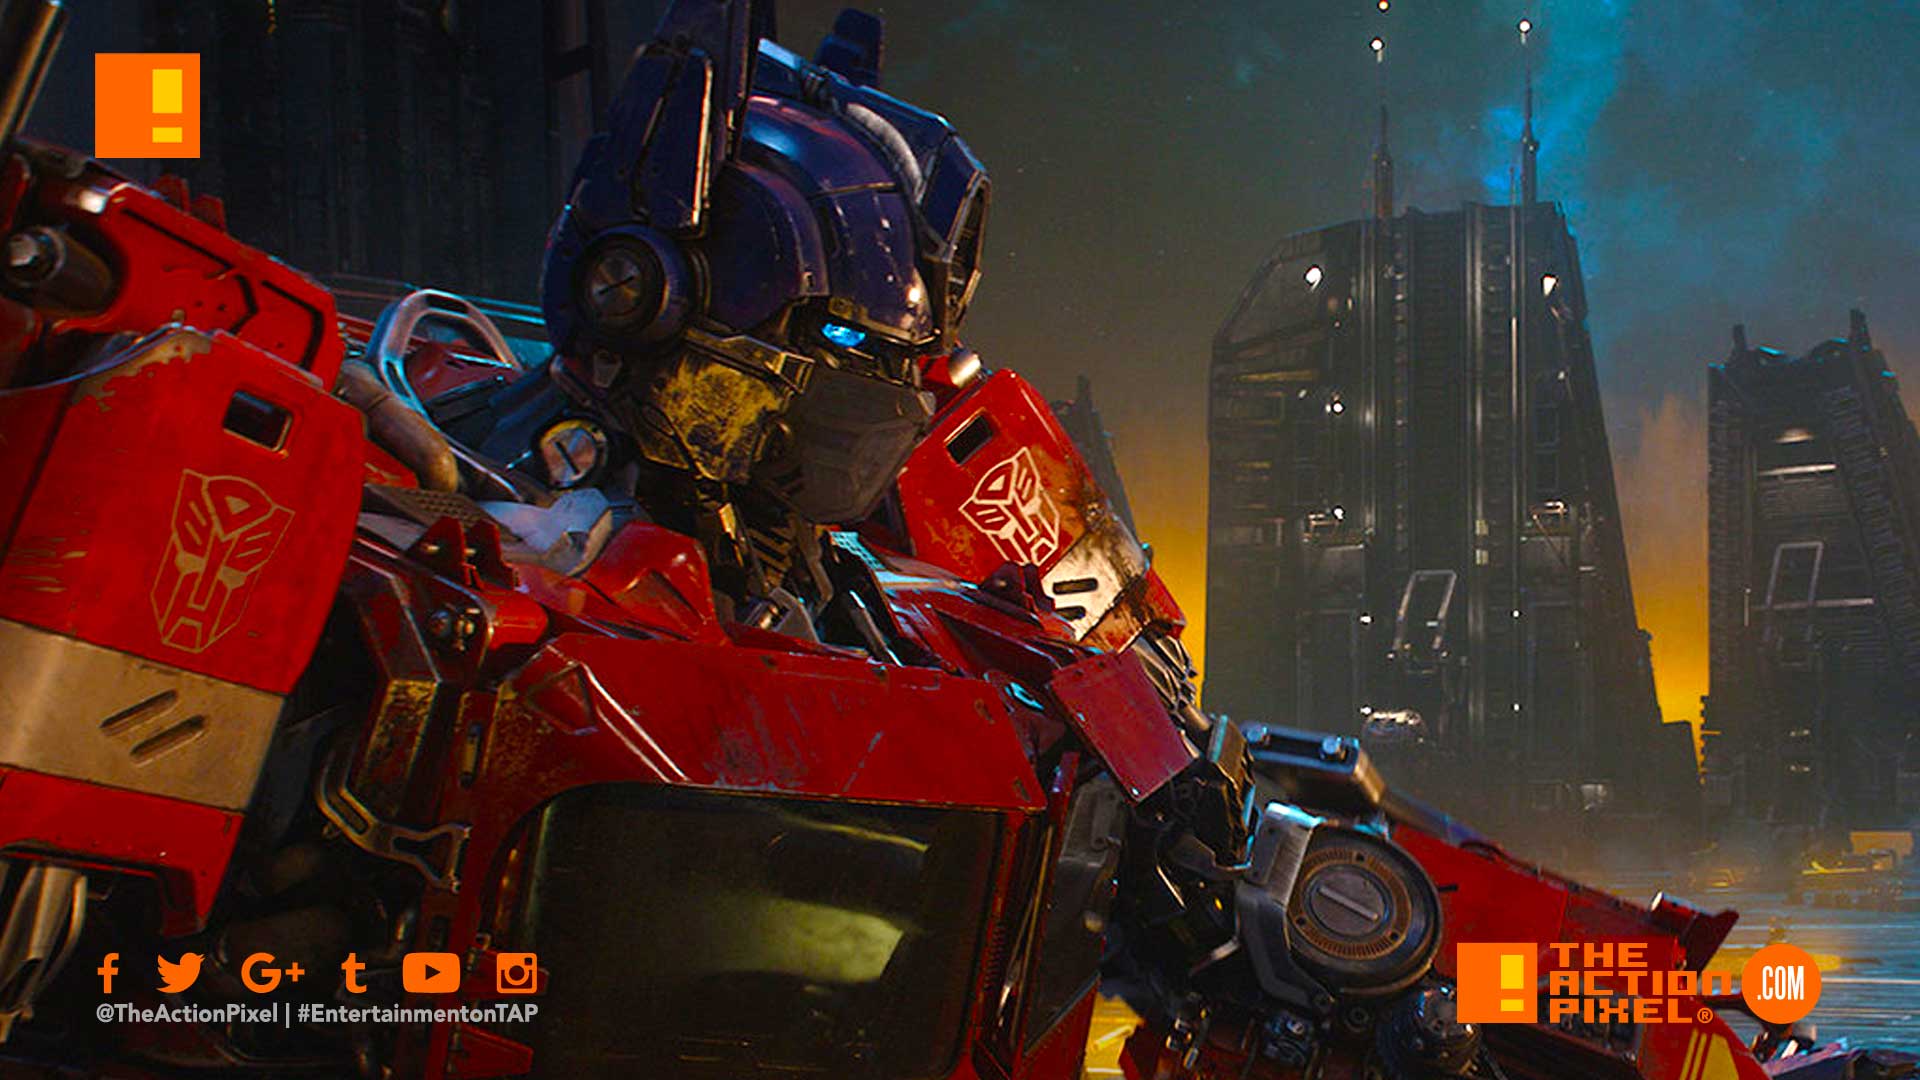 optimus prime, bumblebee, new trailer, transformers, paramount pictures, Bumblebee, Hailee Steinfeld ,John Cena, Travis Knight ,Bumblebee Movie, the action pixel, entertainment on tap, first look, image,bumblebee movie, bumblebee trailer,bumblebee review, bumblebee movie review, film review,